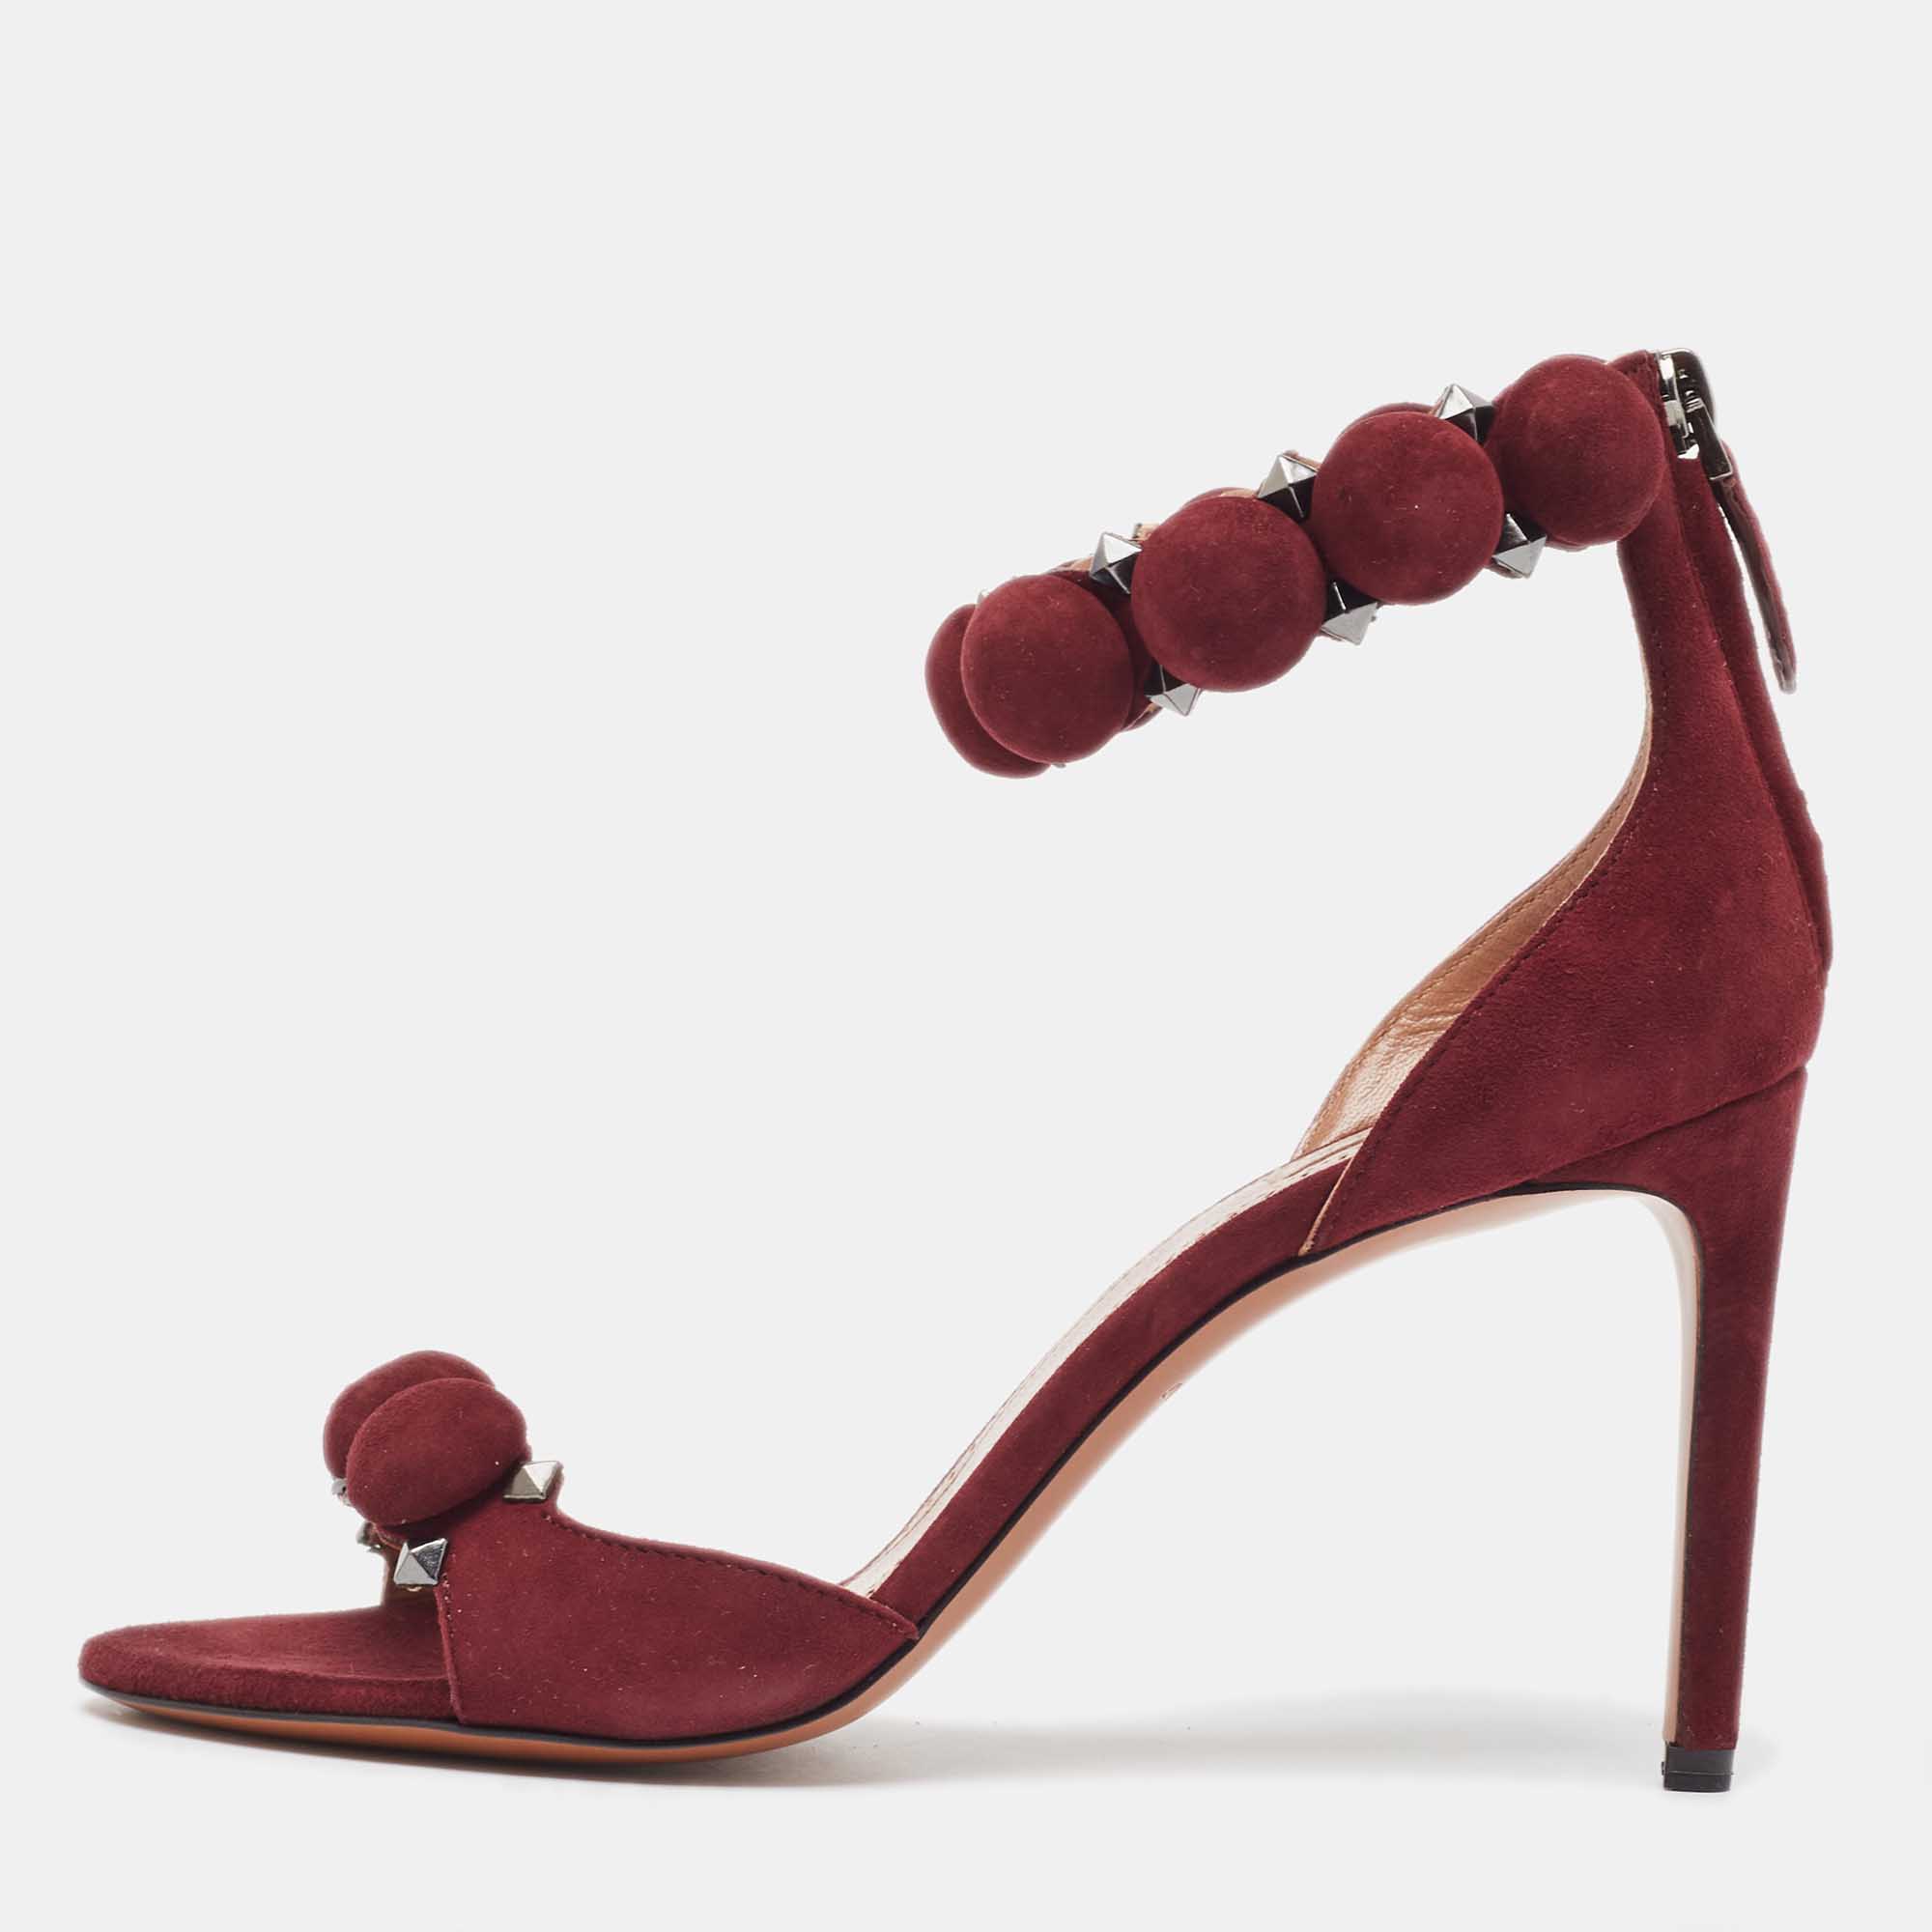 Alaia burgundy suede leather chamois bombe ankle cuff sandals size 37